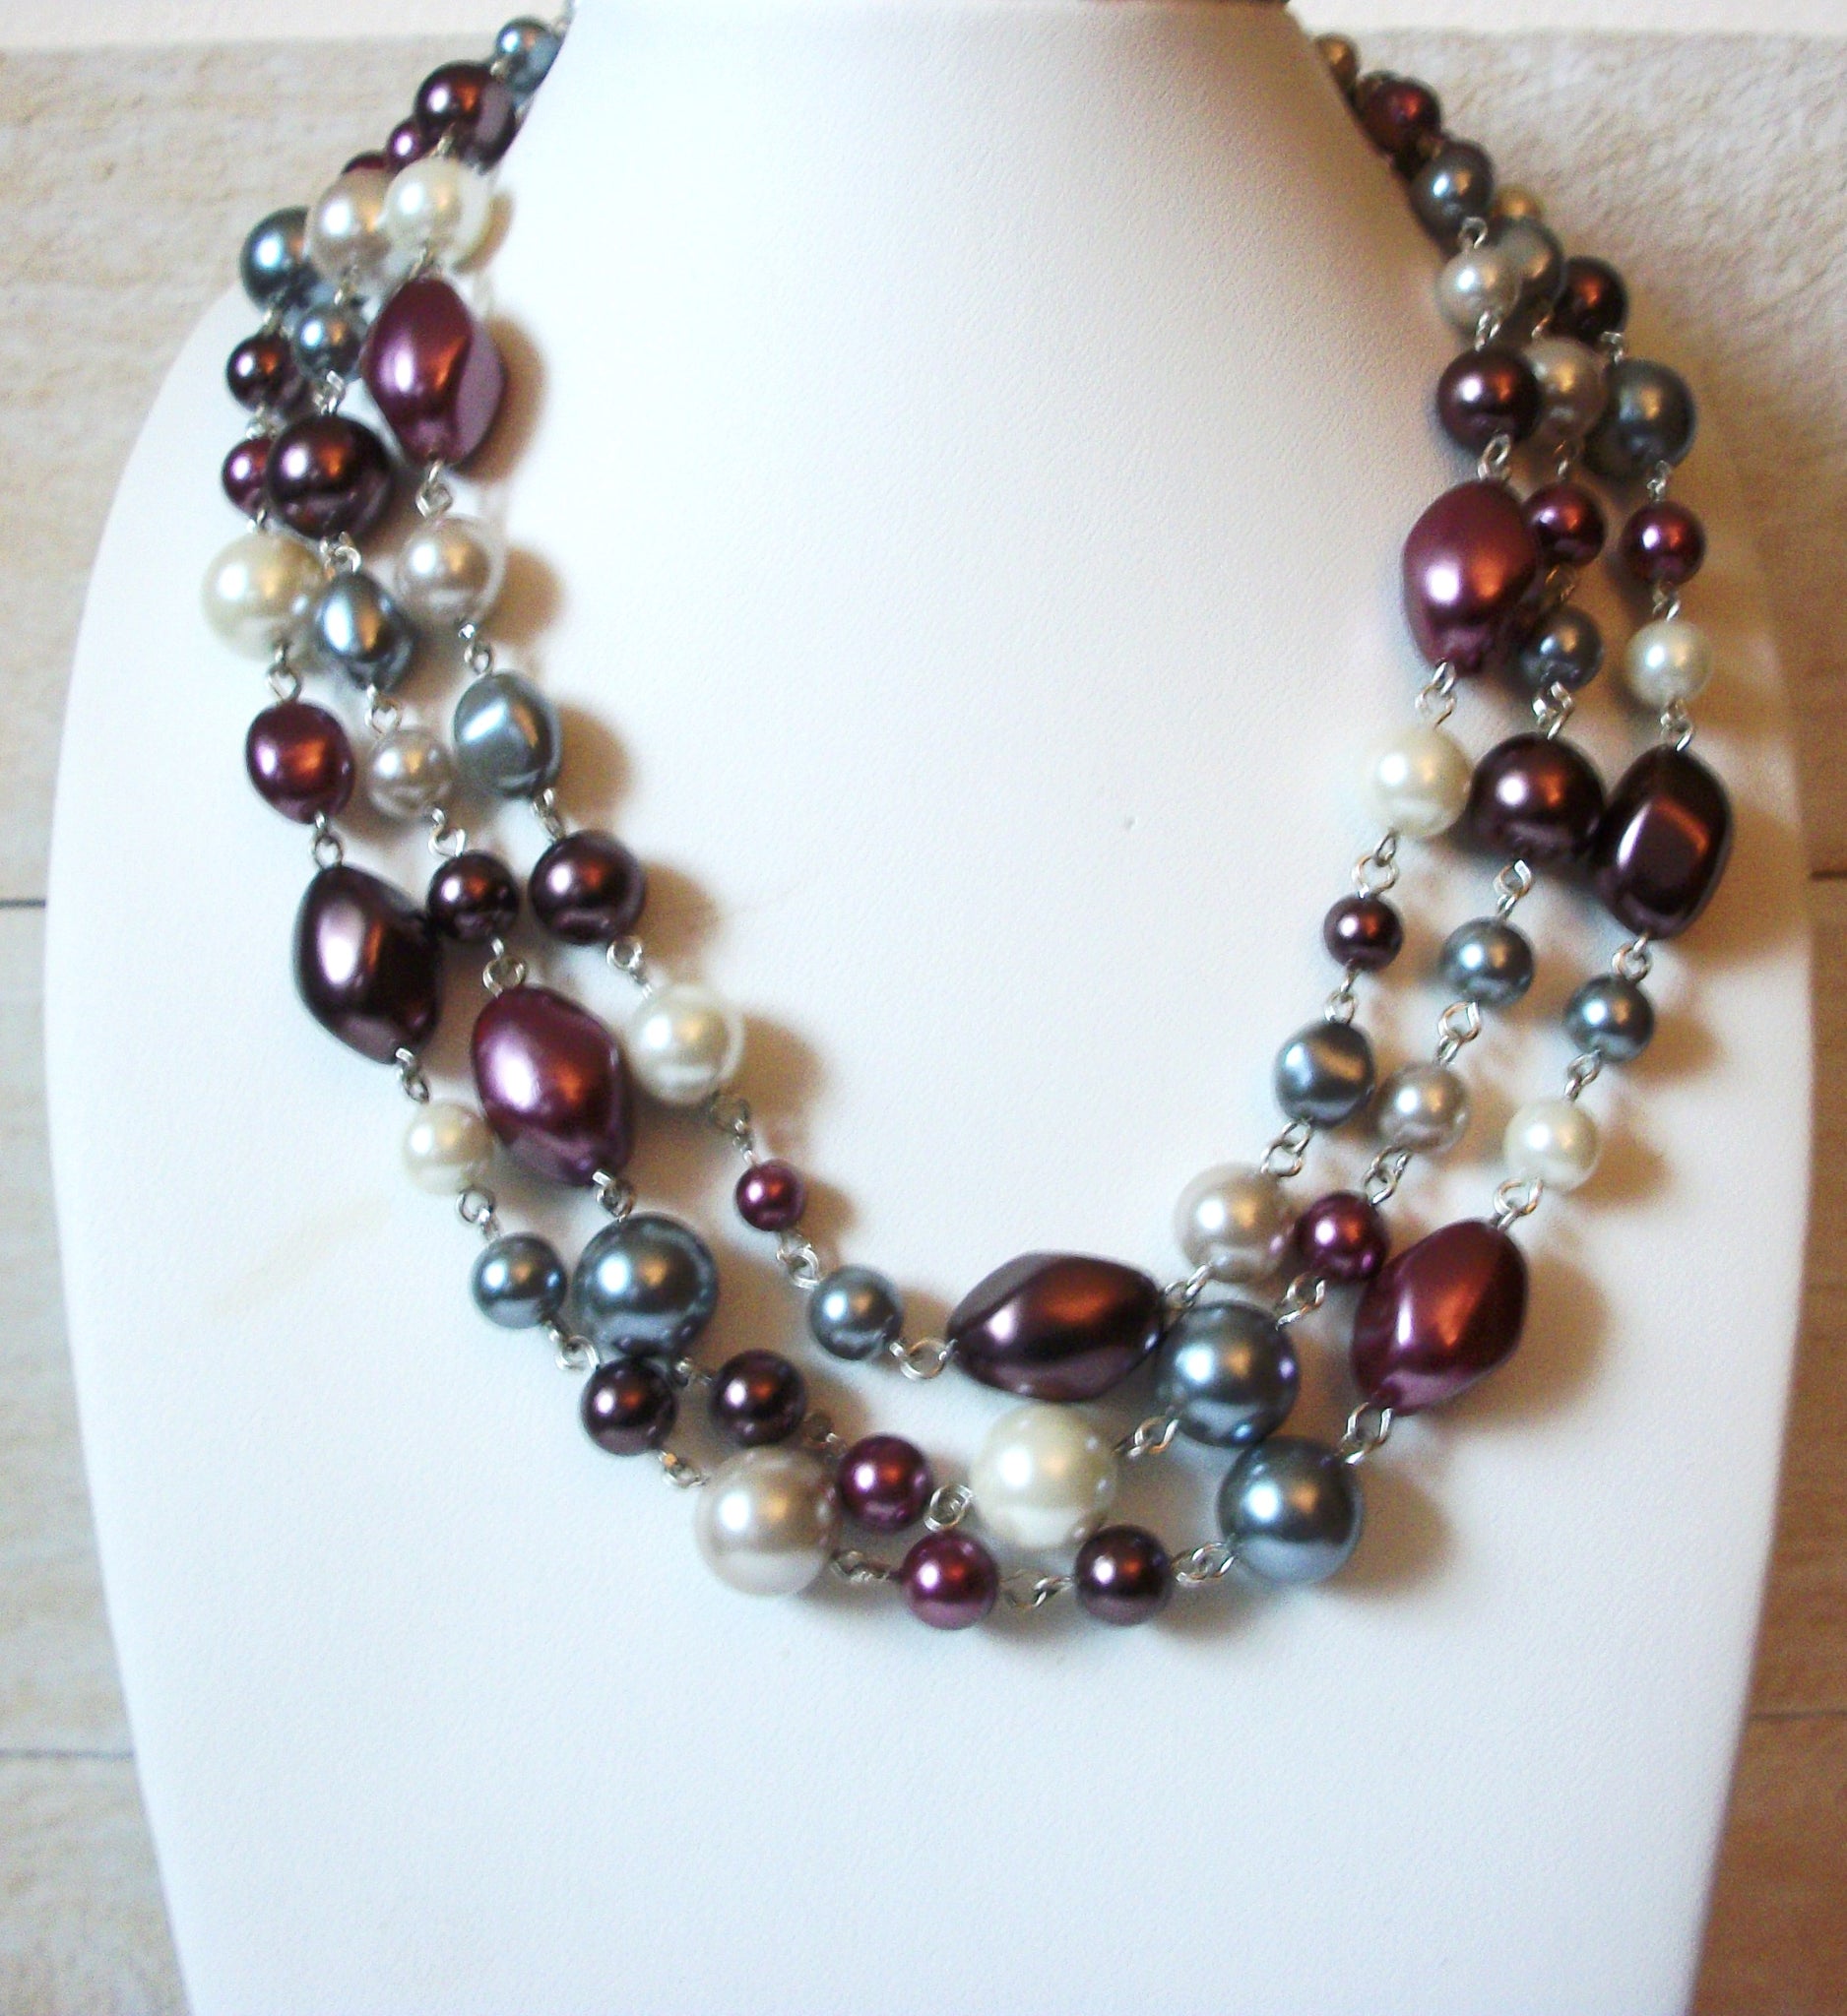 Vintage Glass Beads Necklace 41520